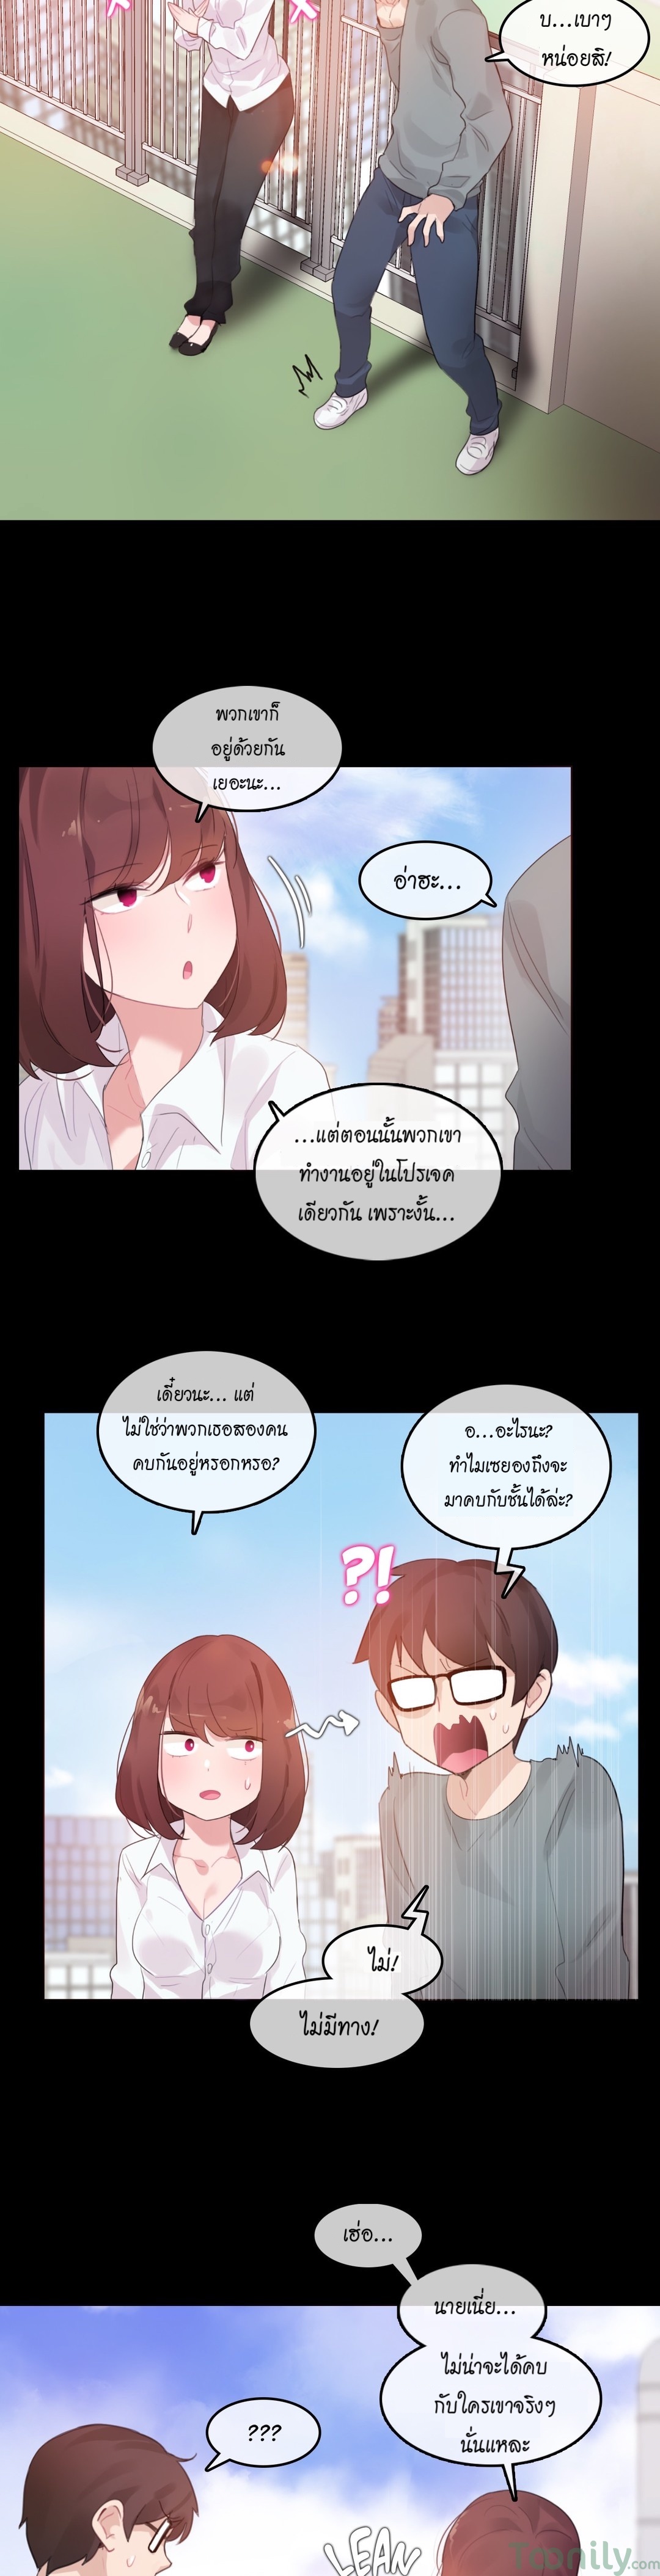 A Pervert’s Daily Life62 (10)